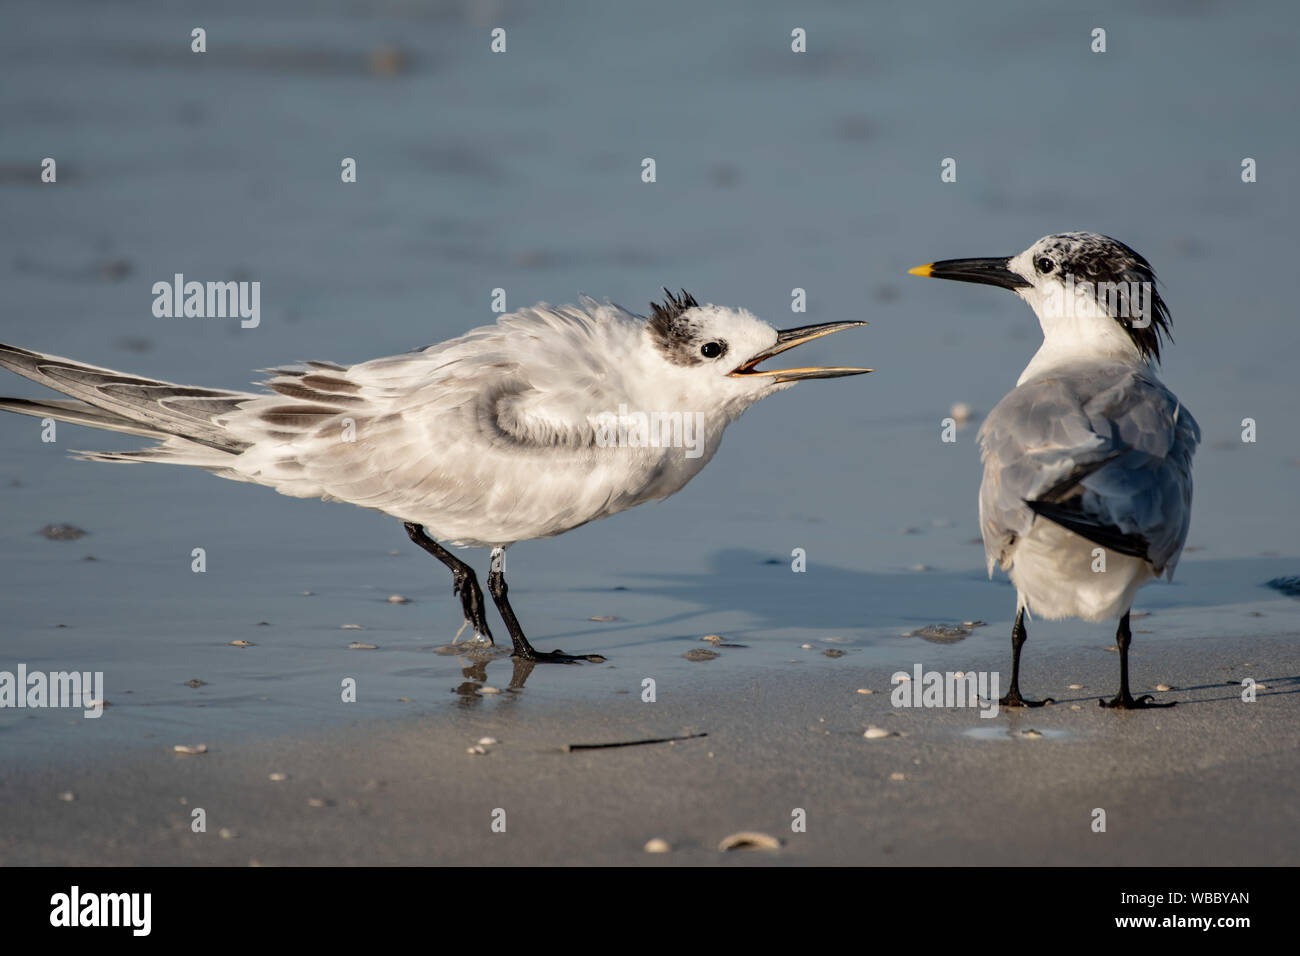 Two royal terns having a conversation on the beach in Florida Stock Photo